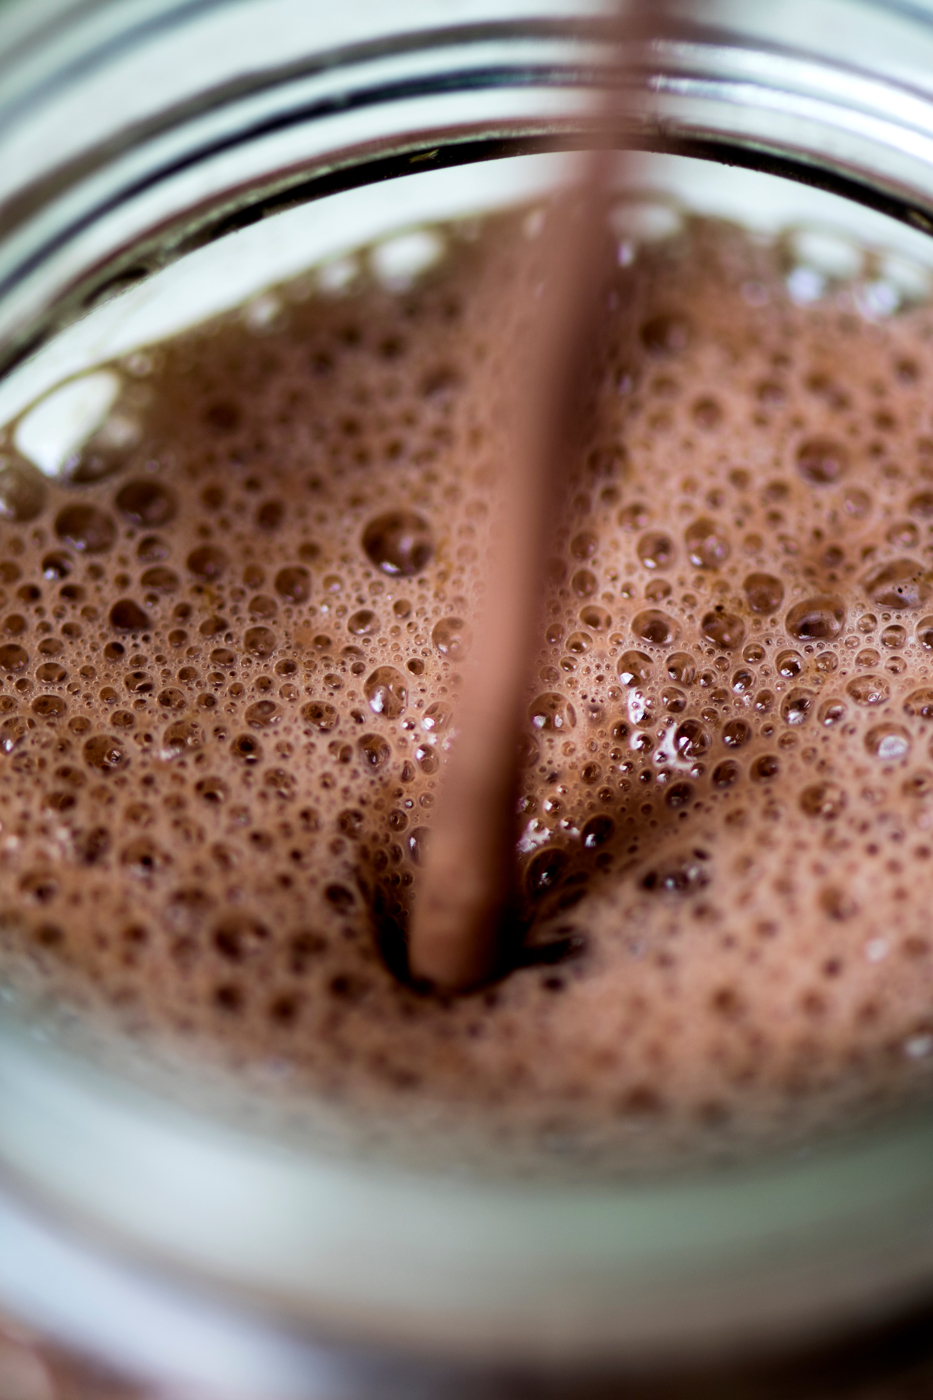 You have grown up. Now chocolate milk has, too. - News ...